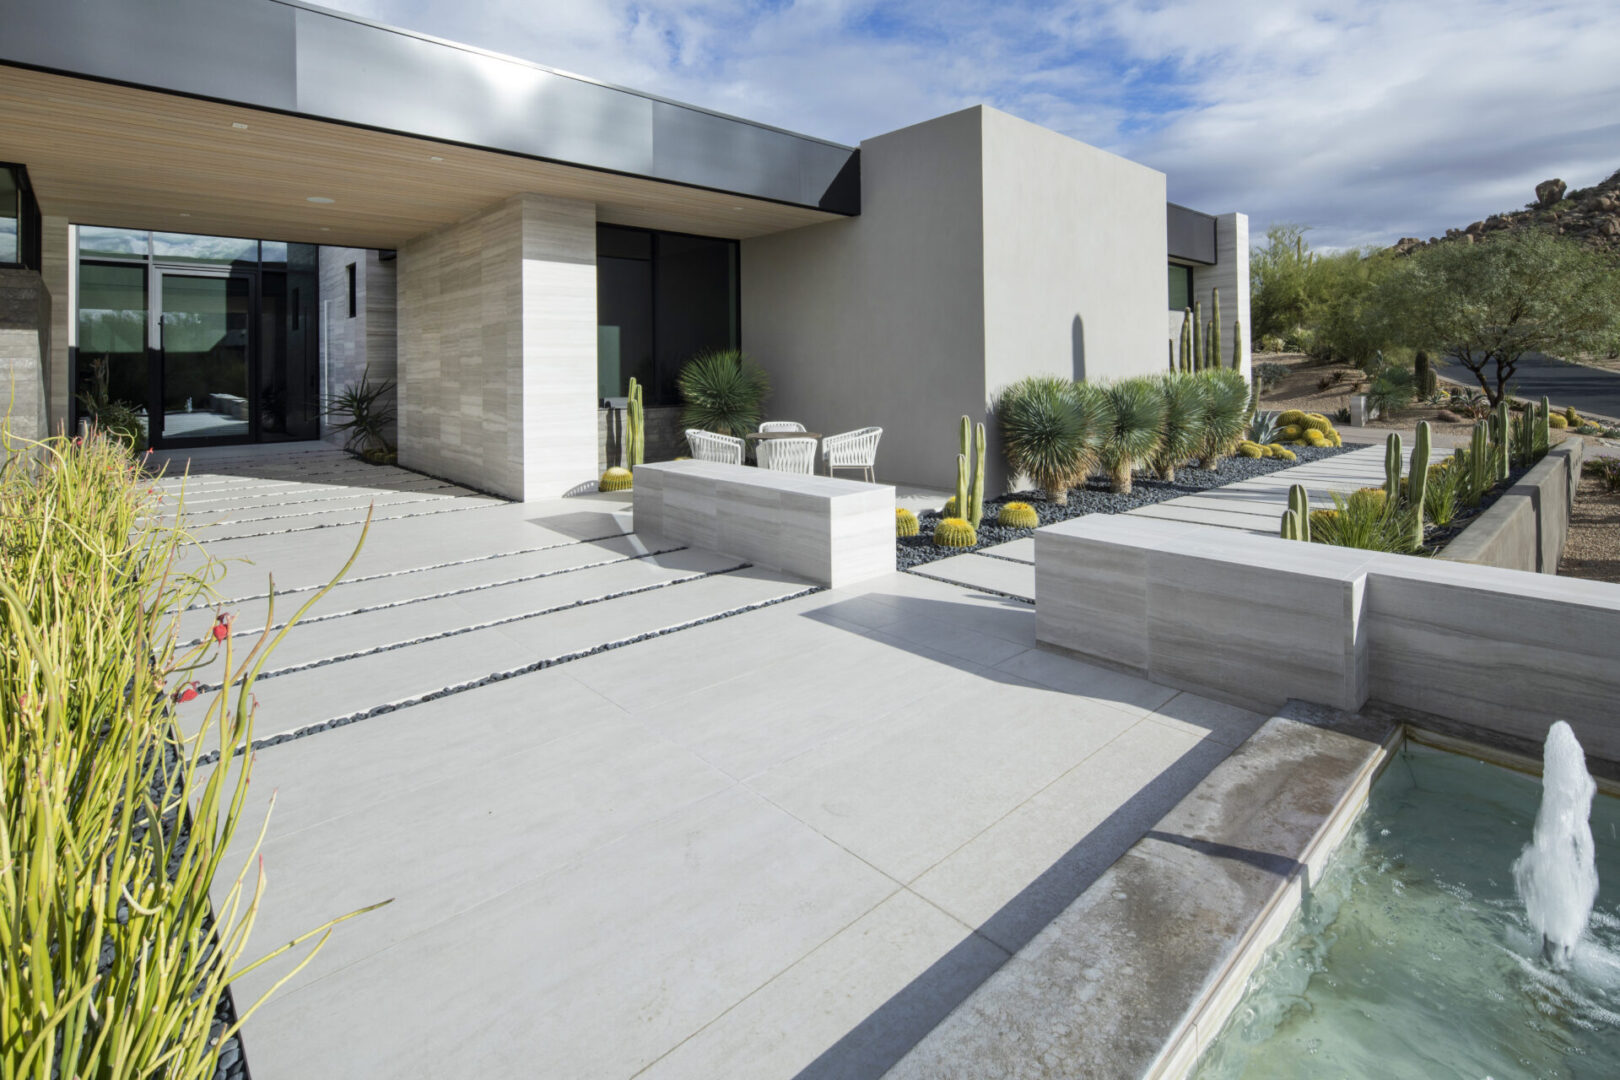 A modern house with concrete steps and a pool.